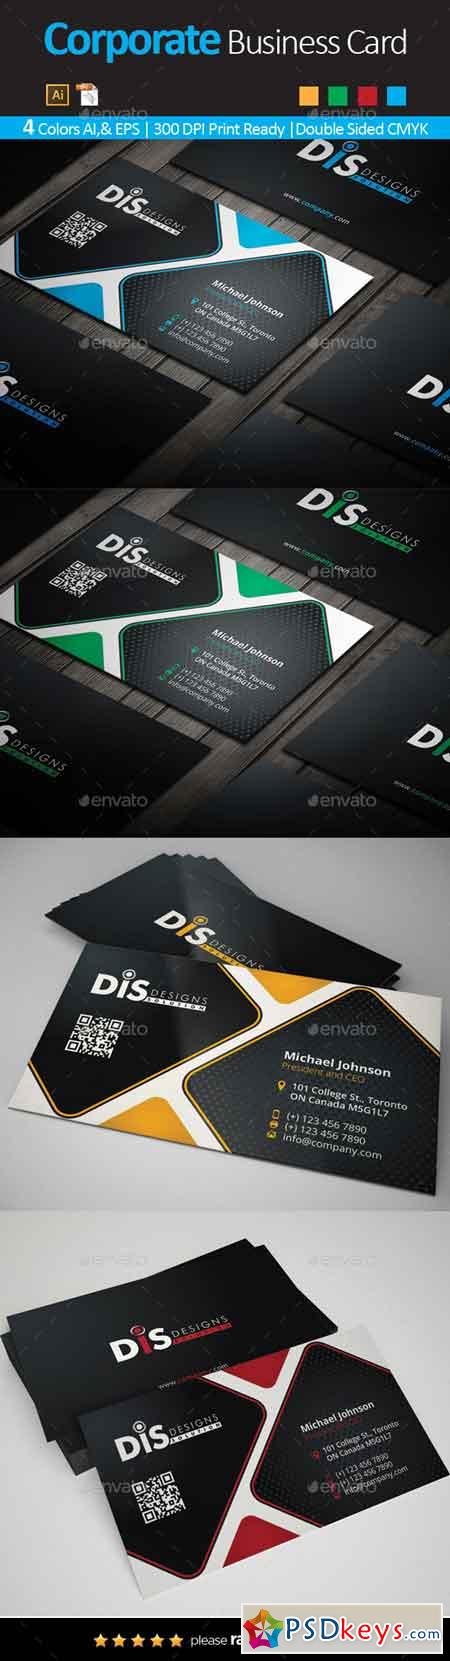 Business Card 10983634